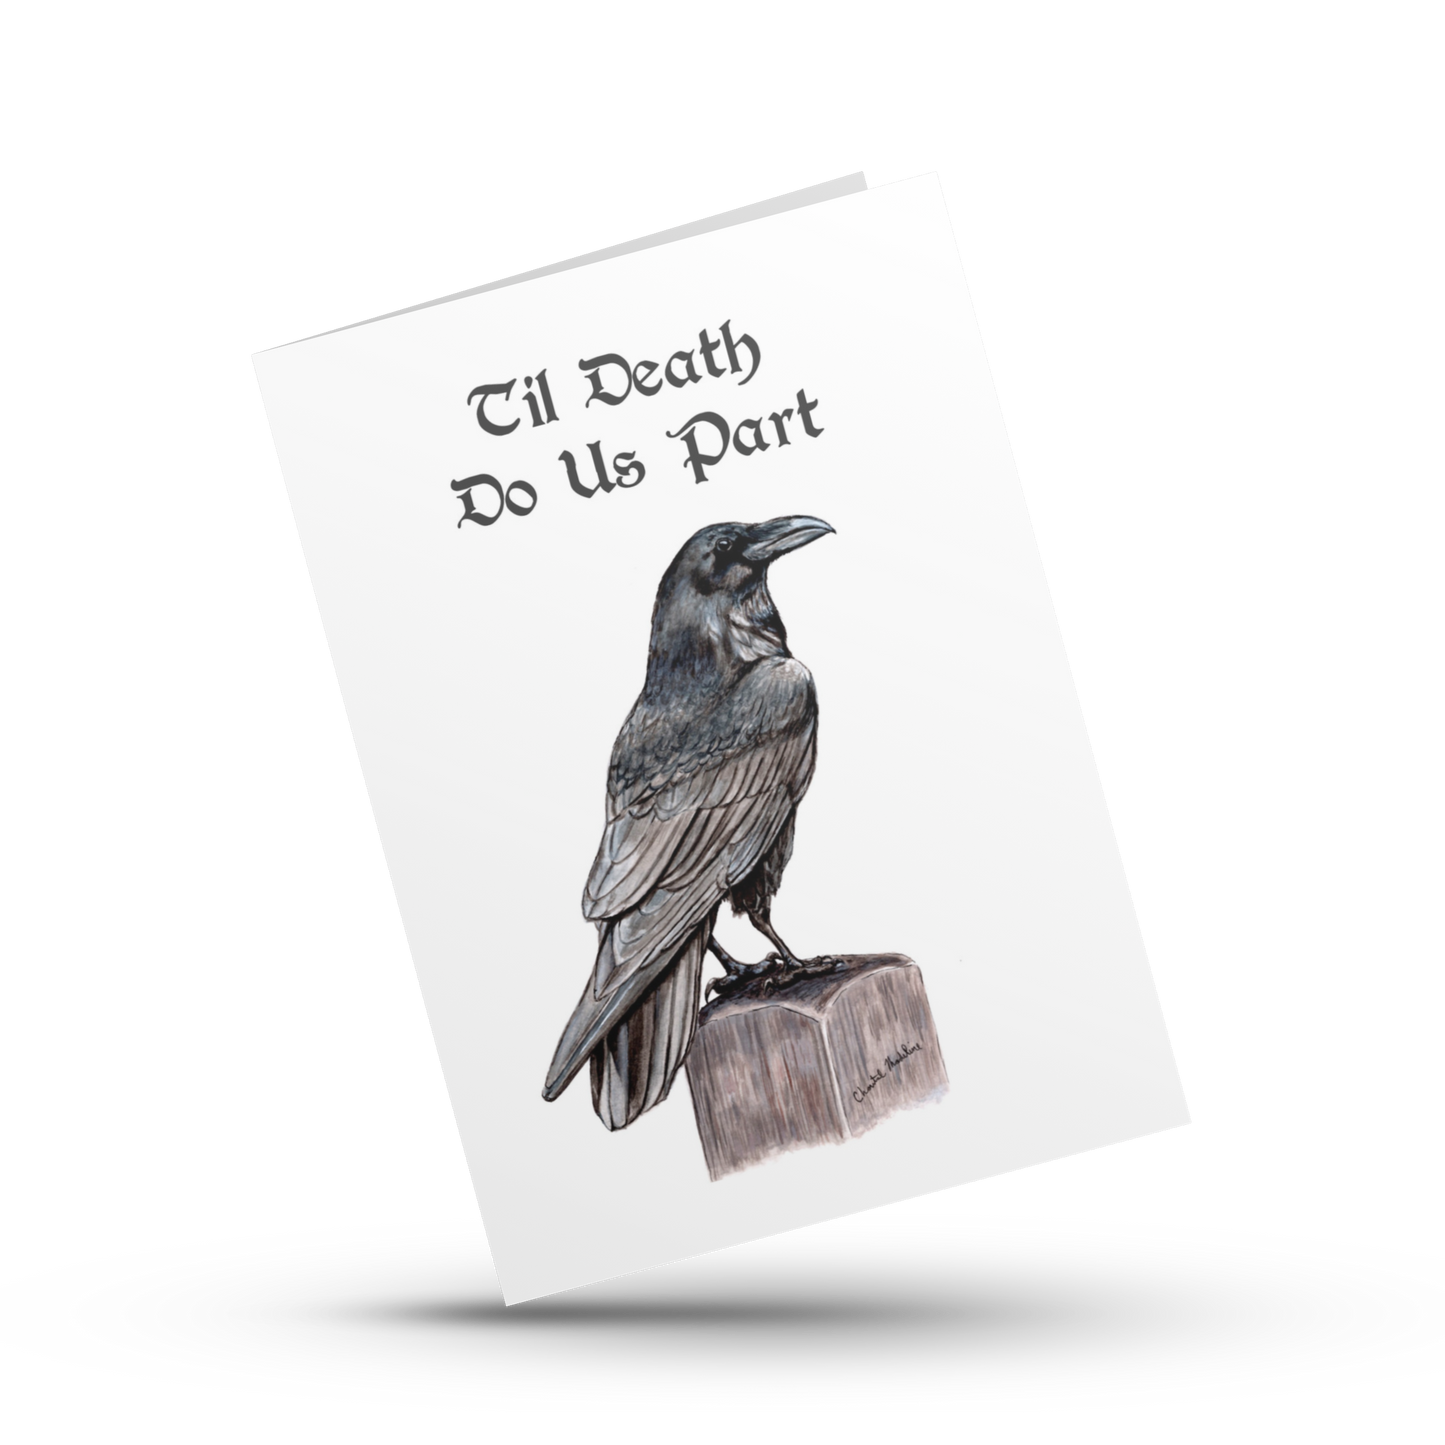 Til death do us part, Anniversary card, Card for husband, Card for wife, Goth wedding card, Halloween love card, Engagement card, Raven card